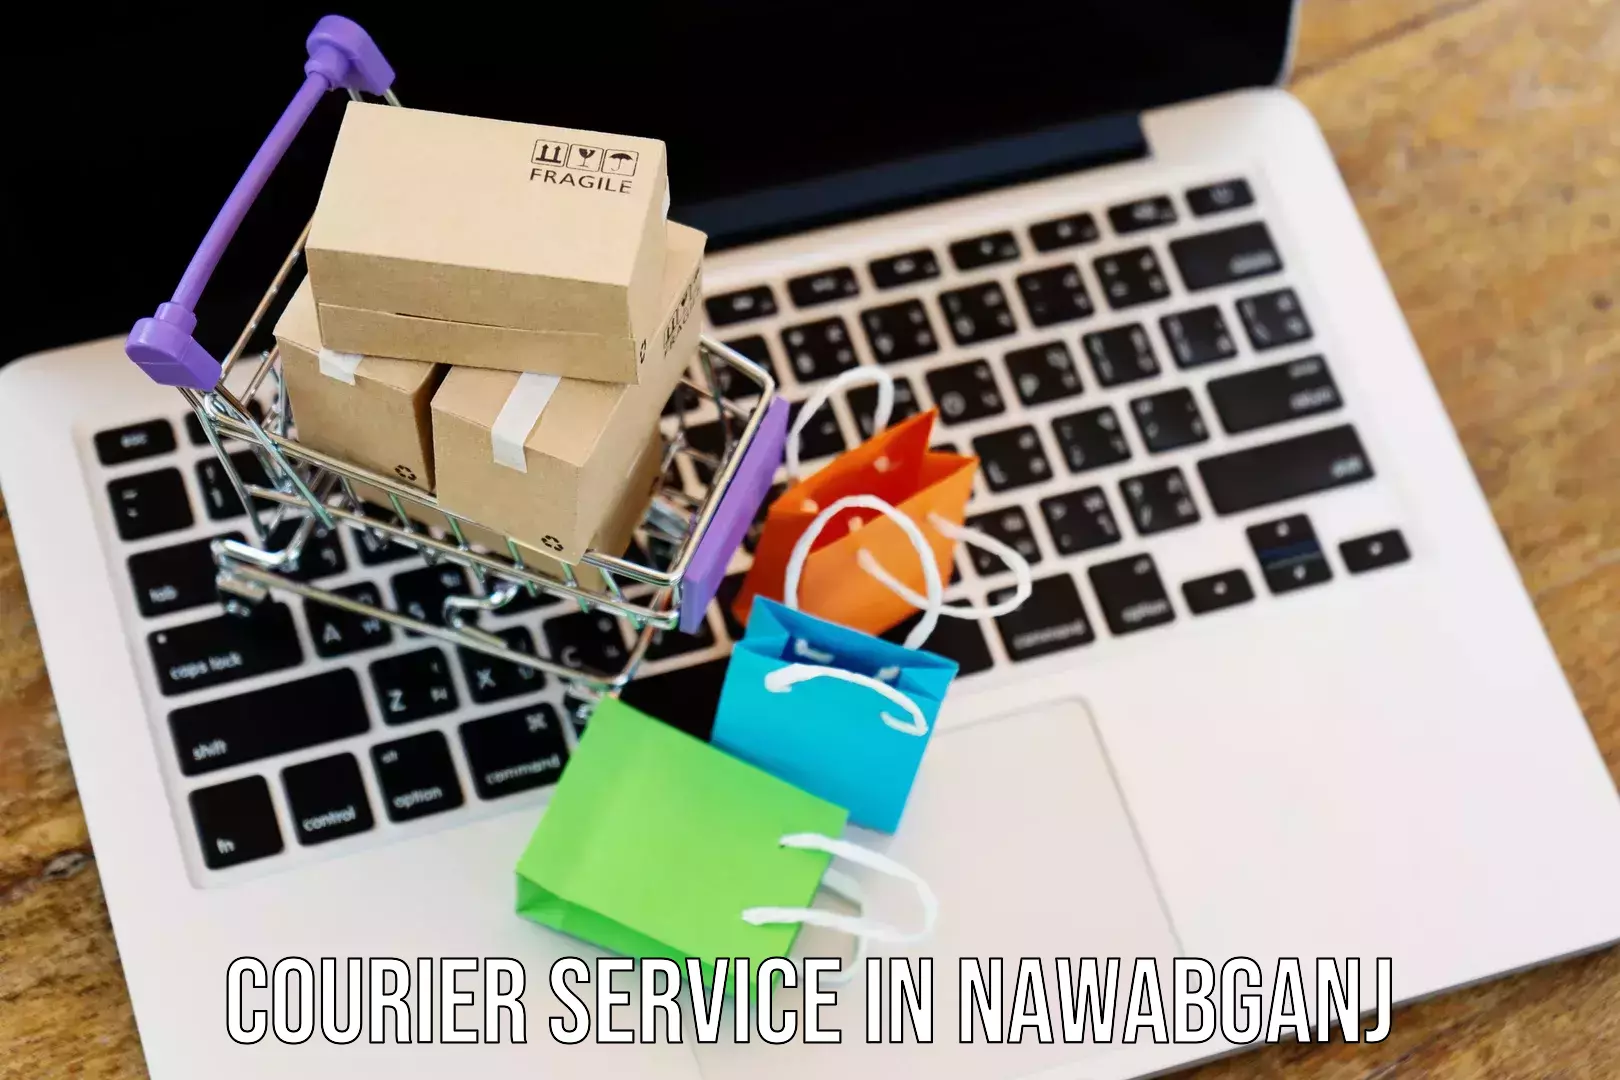 Customer-friendly courier services in Nawabganj